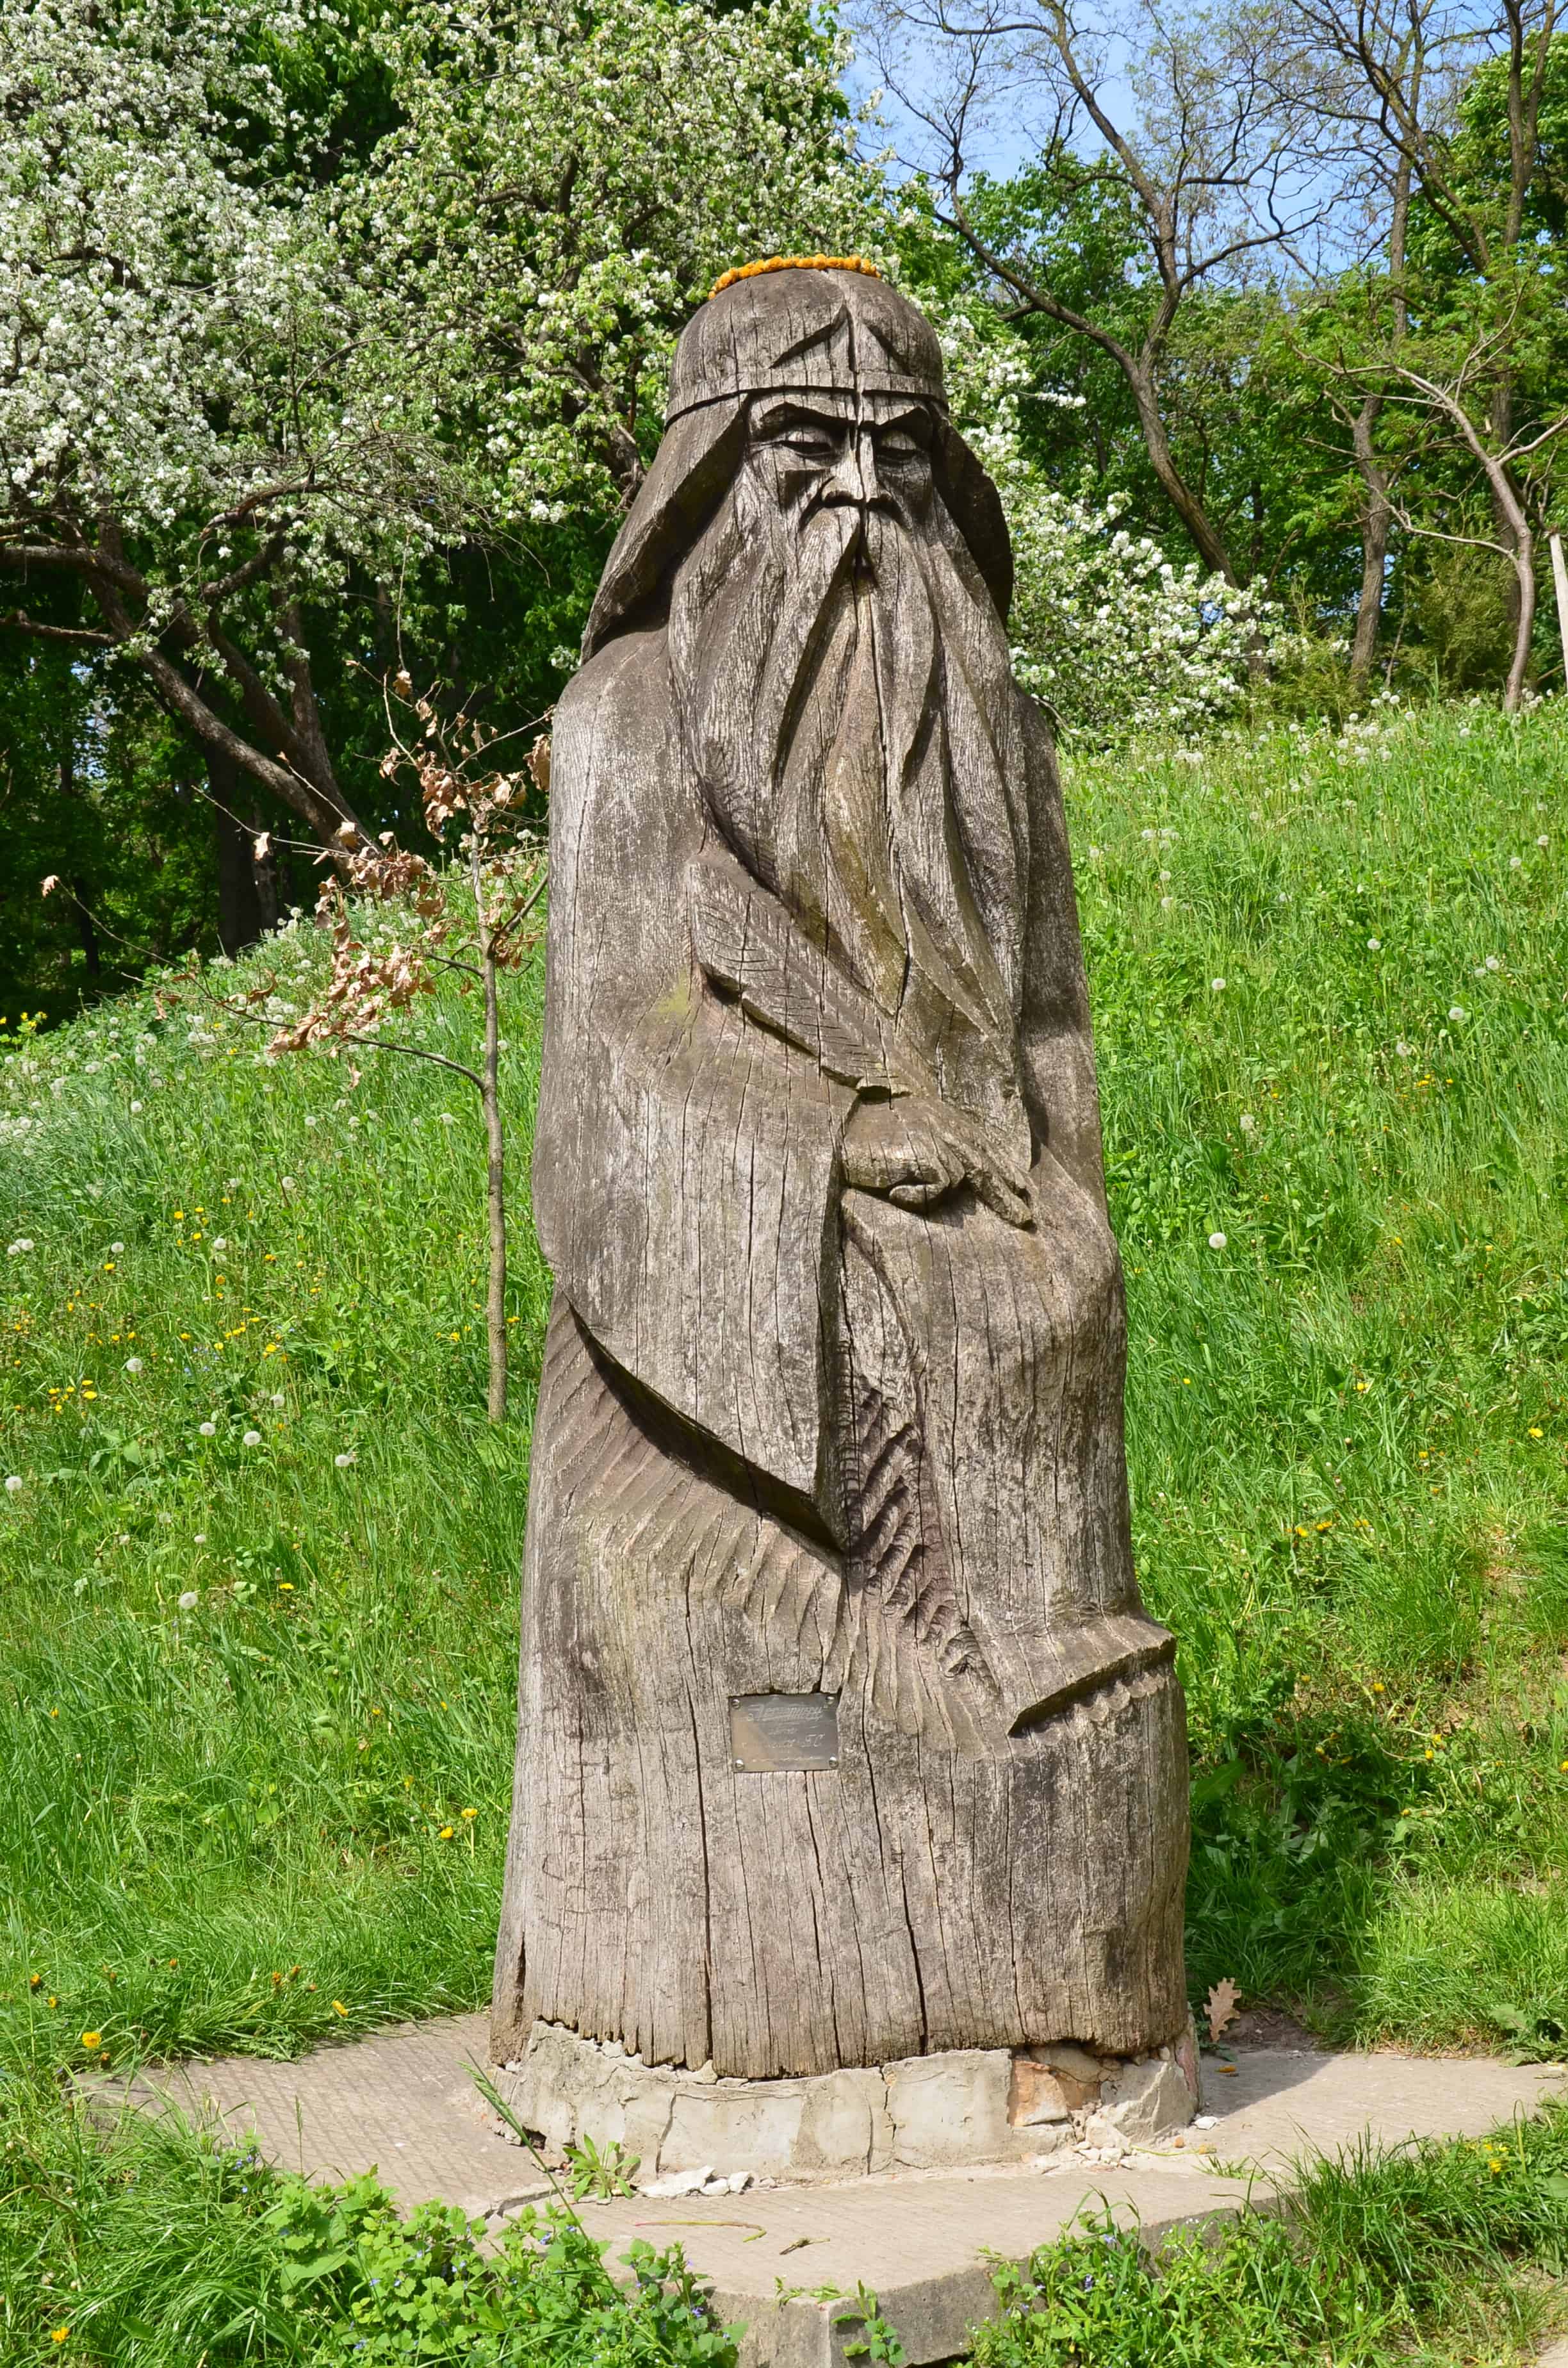 Wood carving at St. Elias Monastery in Chernihiv, Ukraine